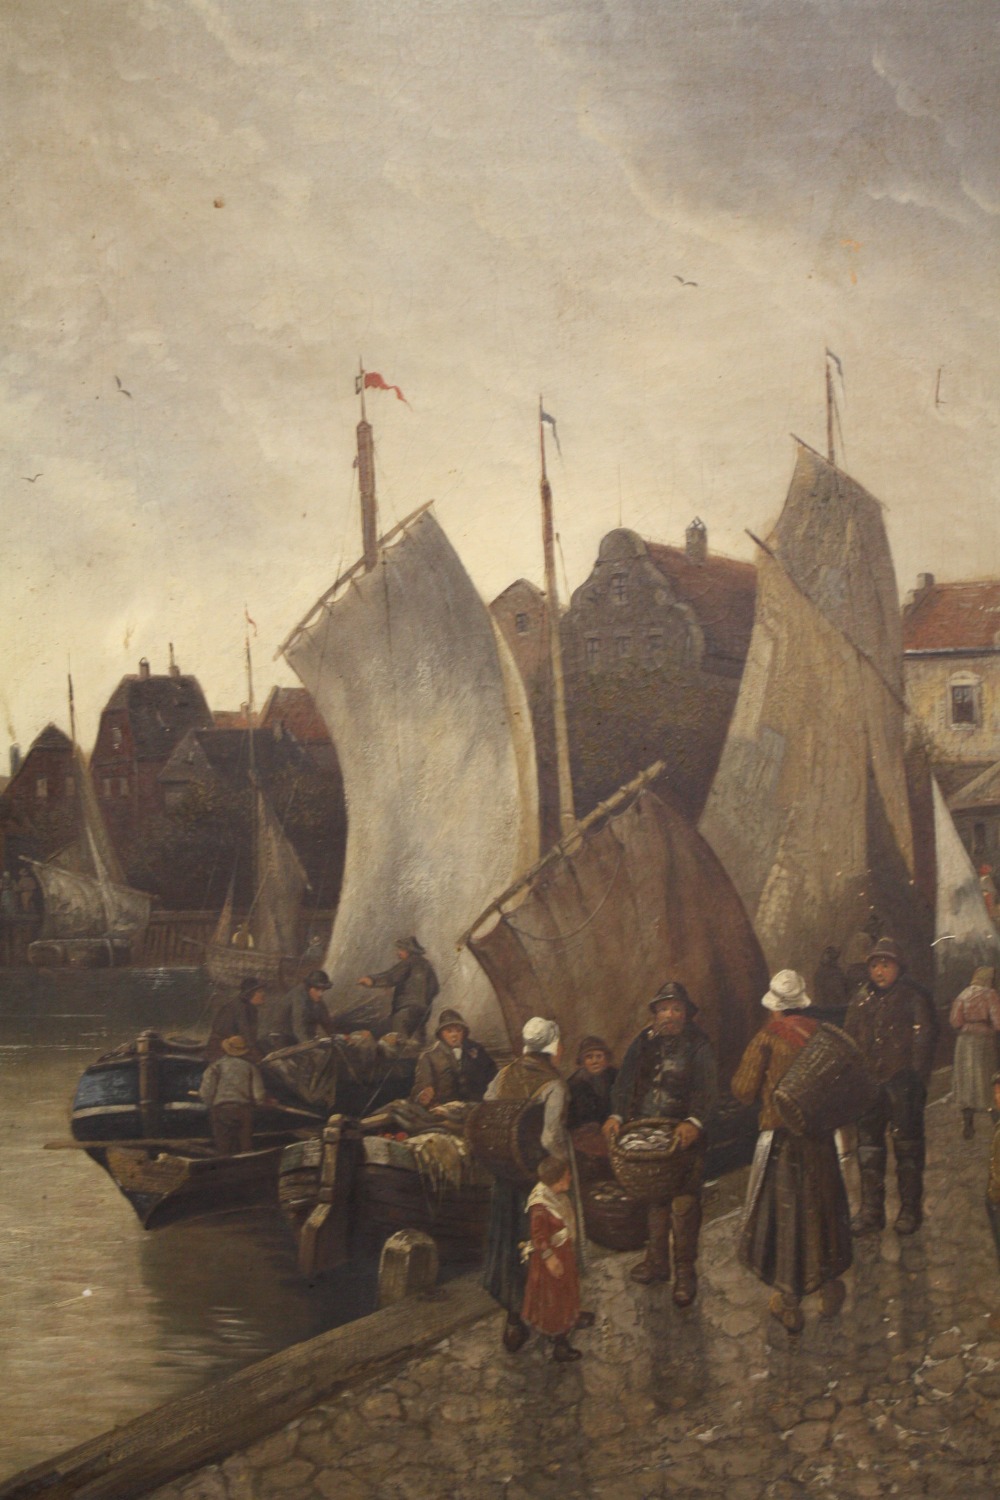 R. MONTI (XIX). Continental school, coastal town scene with moored fishing boat, fishermen and